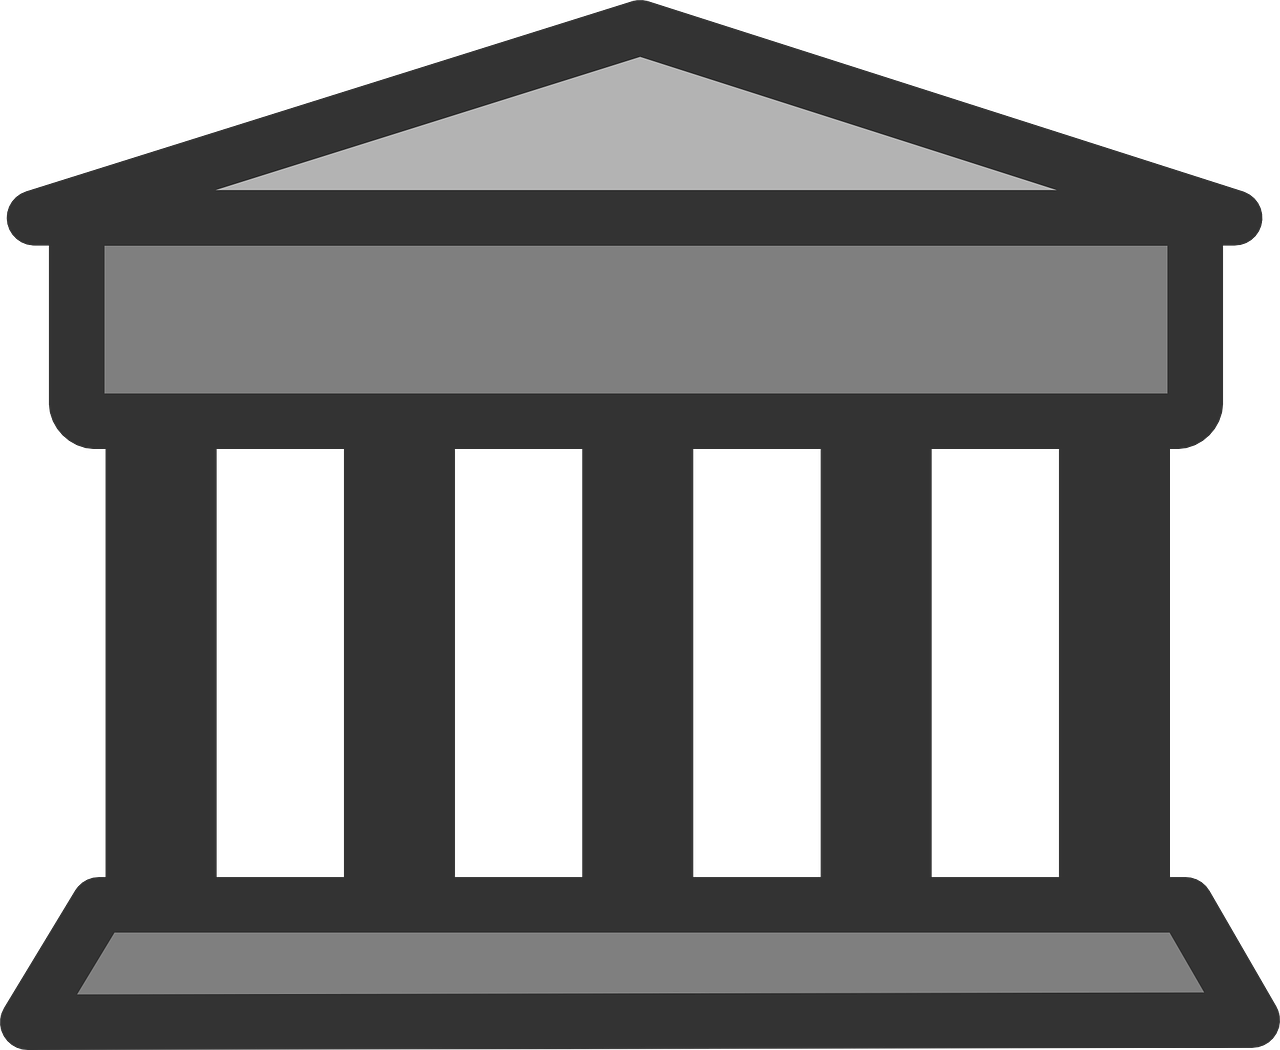 greek,parthenon,temple,icon,symbol,free vector graphics,free pictures, free photos, free images, royalty free, free illustrations, public domain